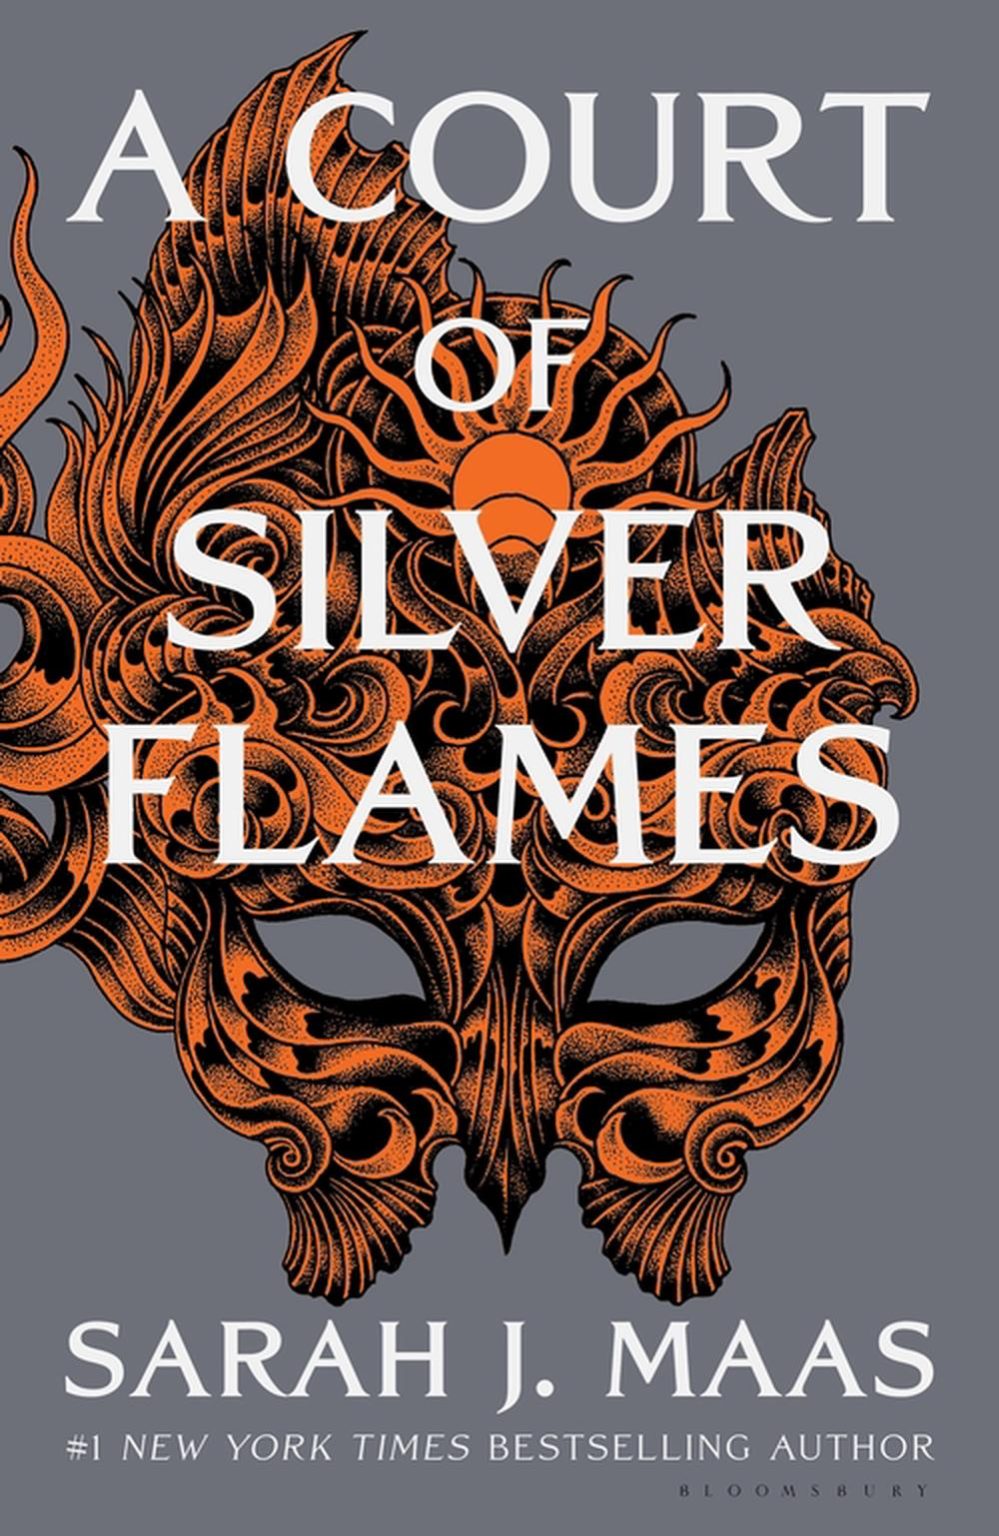 a court of silver flames barnes and noble exclusive edition